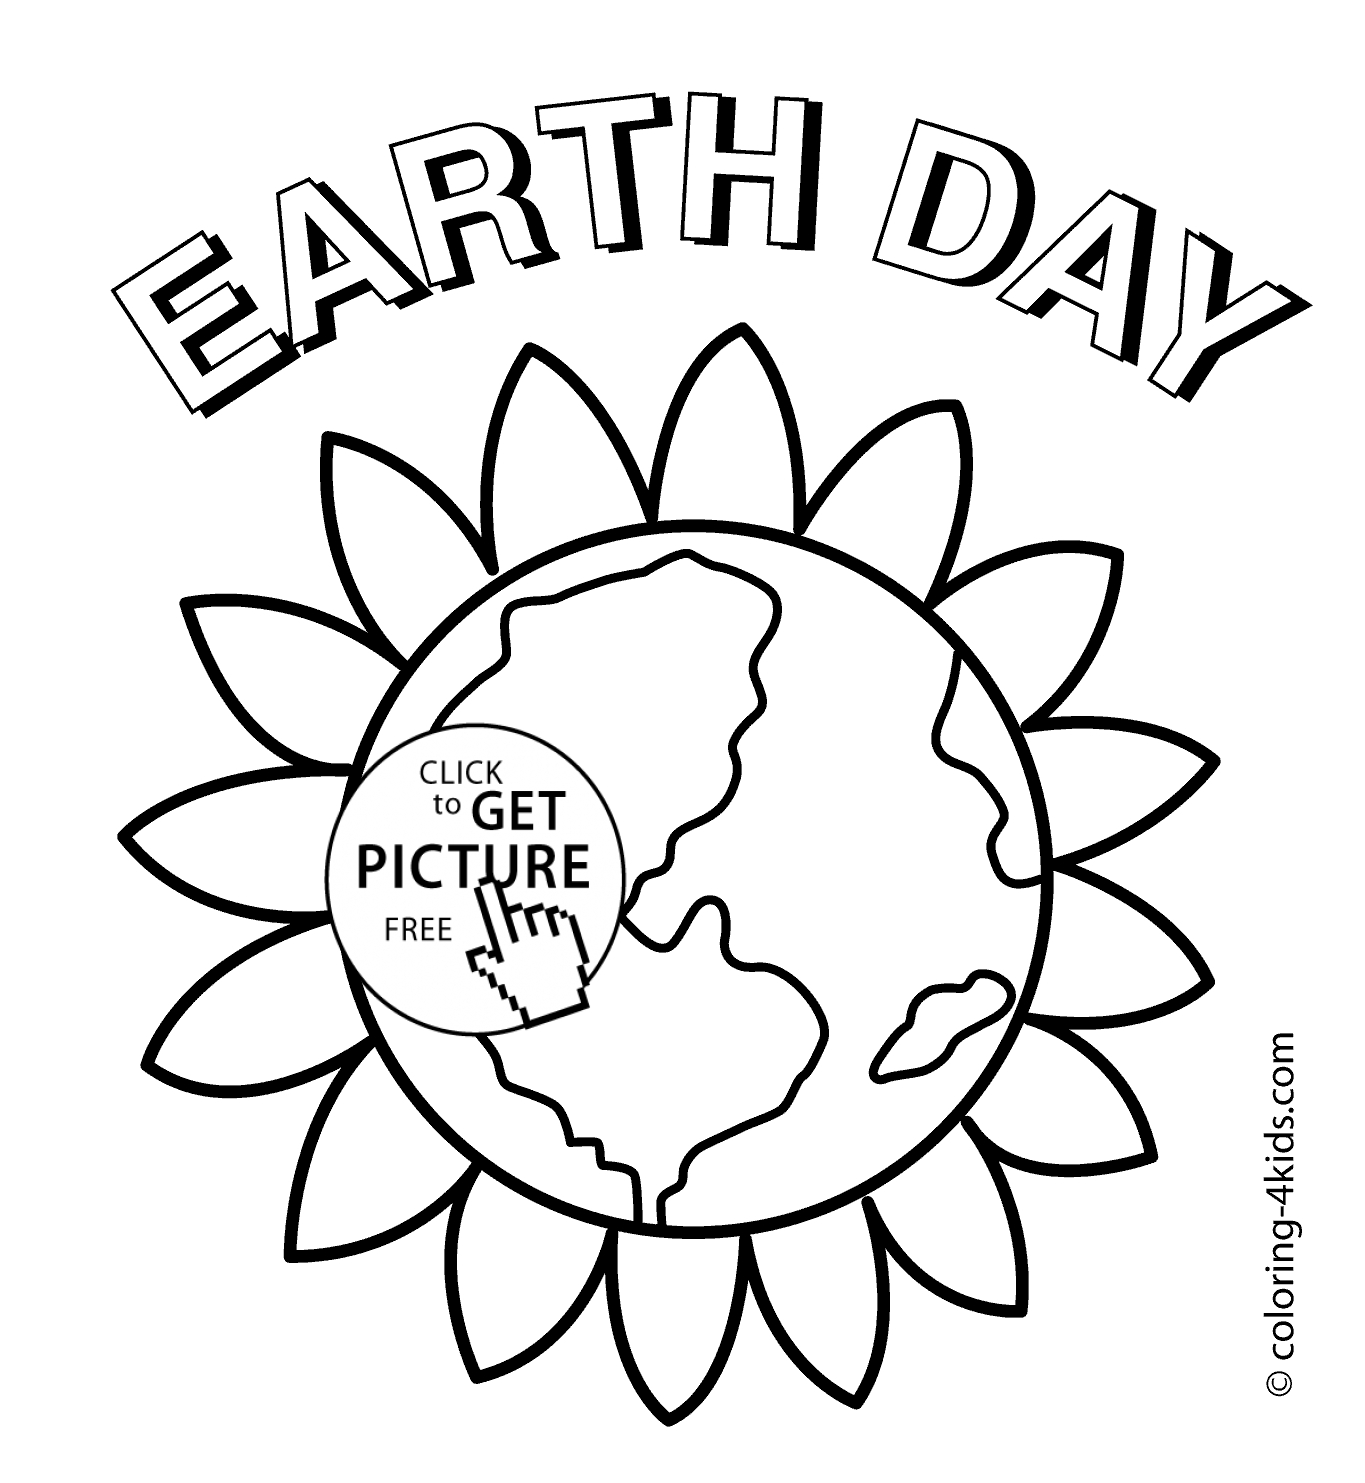 Free Printable Earth Day Coloring Pages And Activities Coloring Pages Earth Day Flower Coloring Pages Outstanding